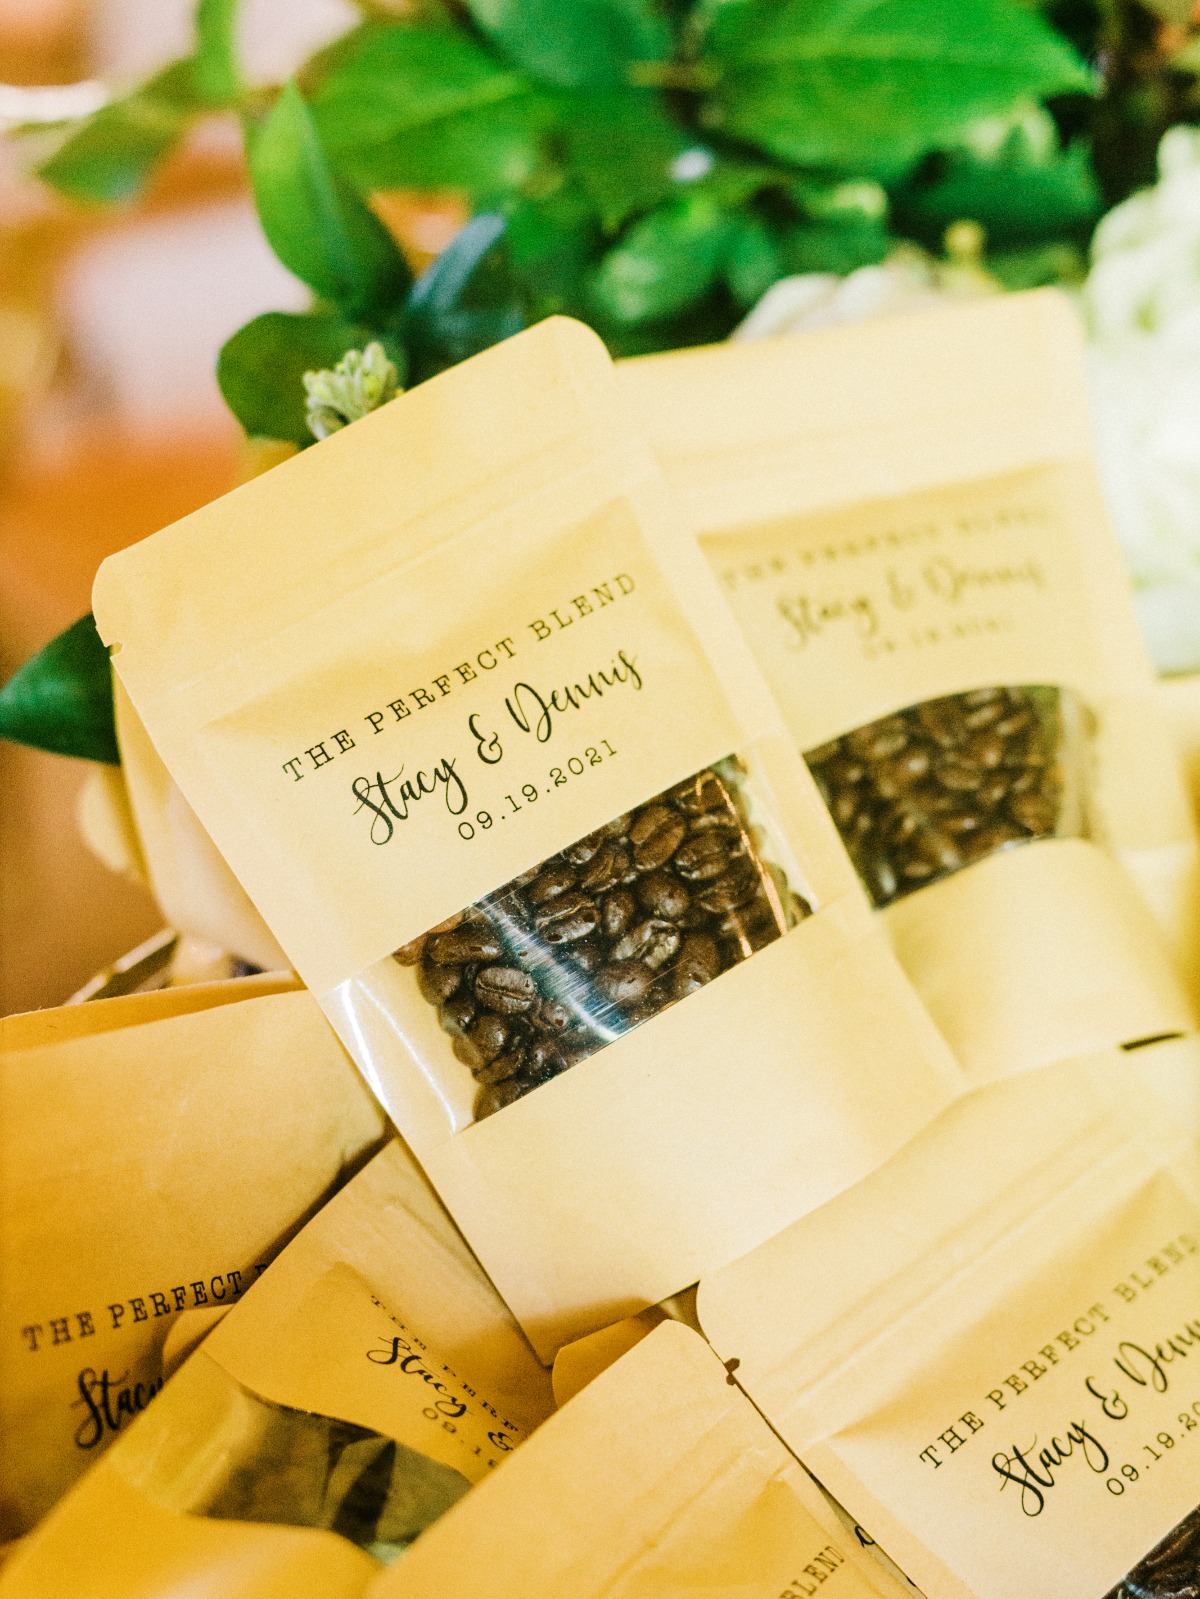 Wedding favors of coffee beans